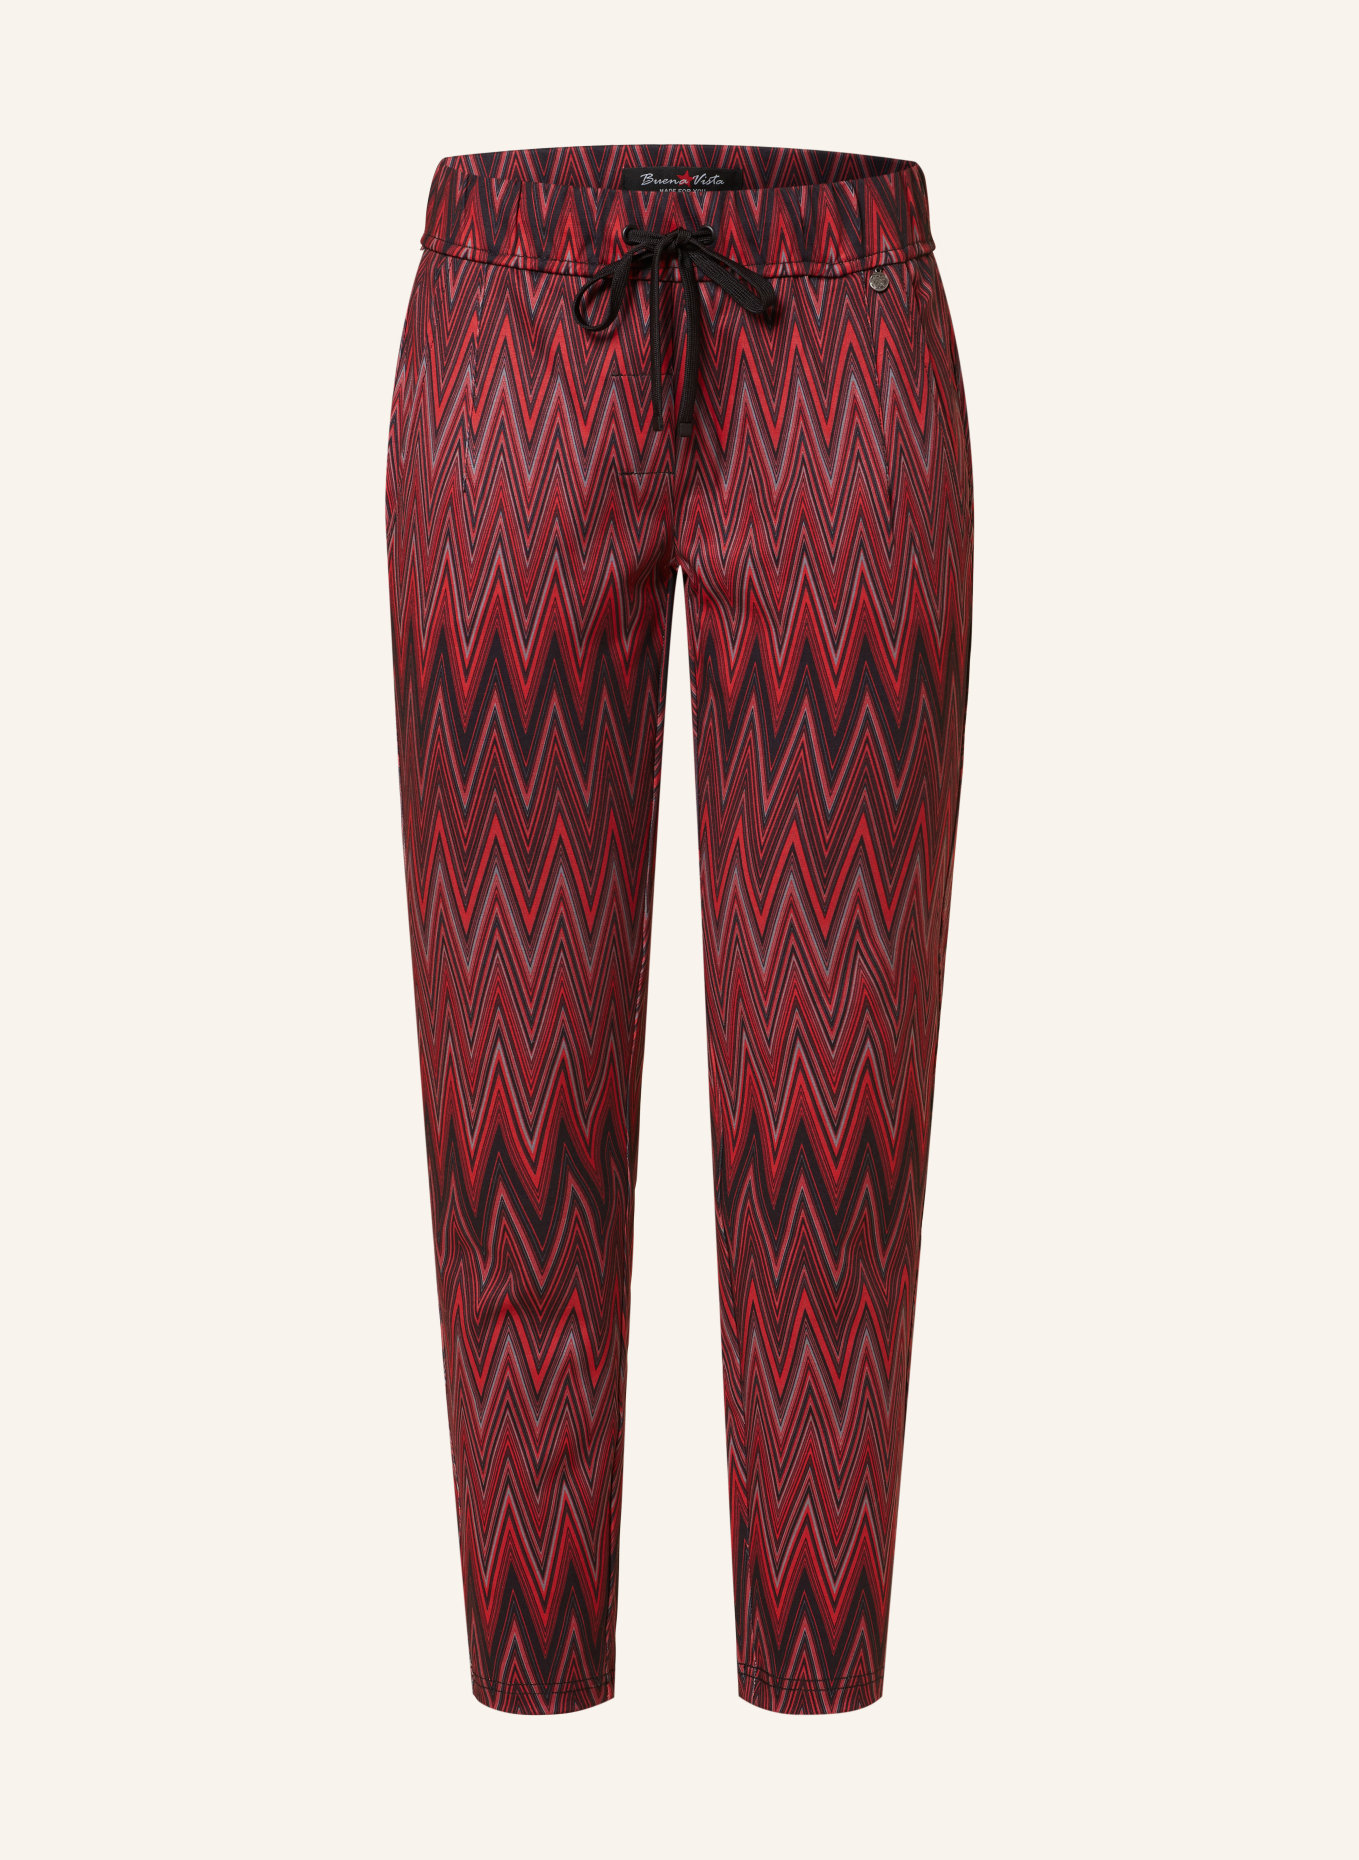 Buena Vista Pants in jogger style, Color: RED/ BLACK/ GRAY (Image 1)